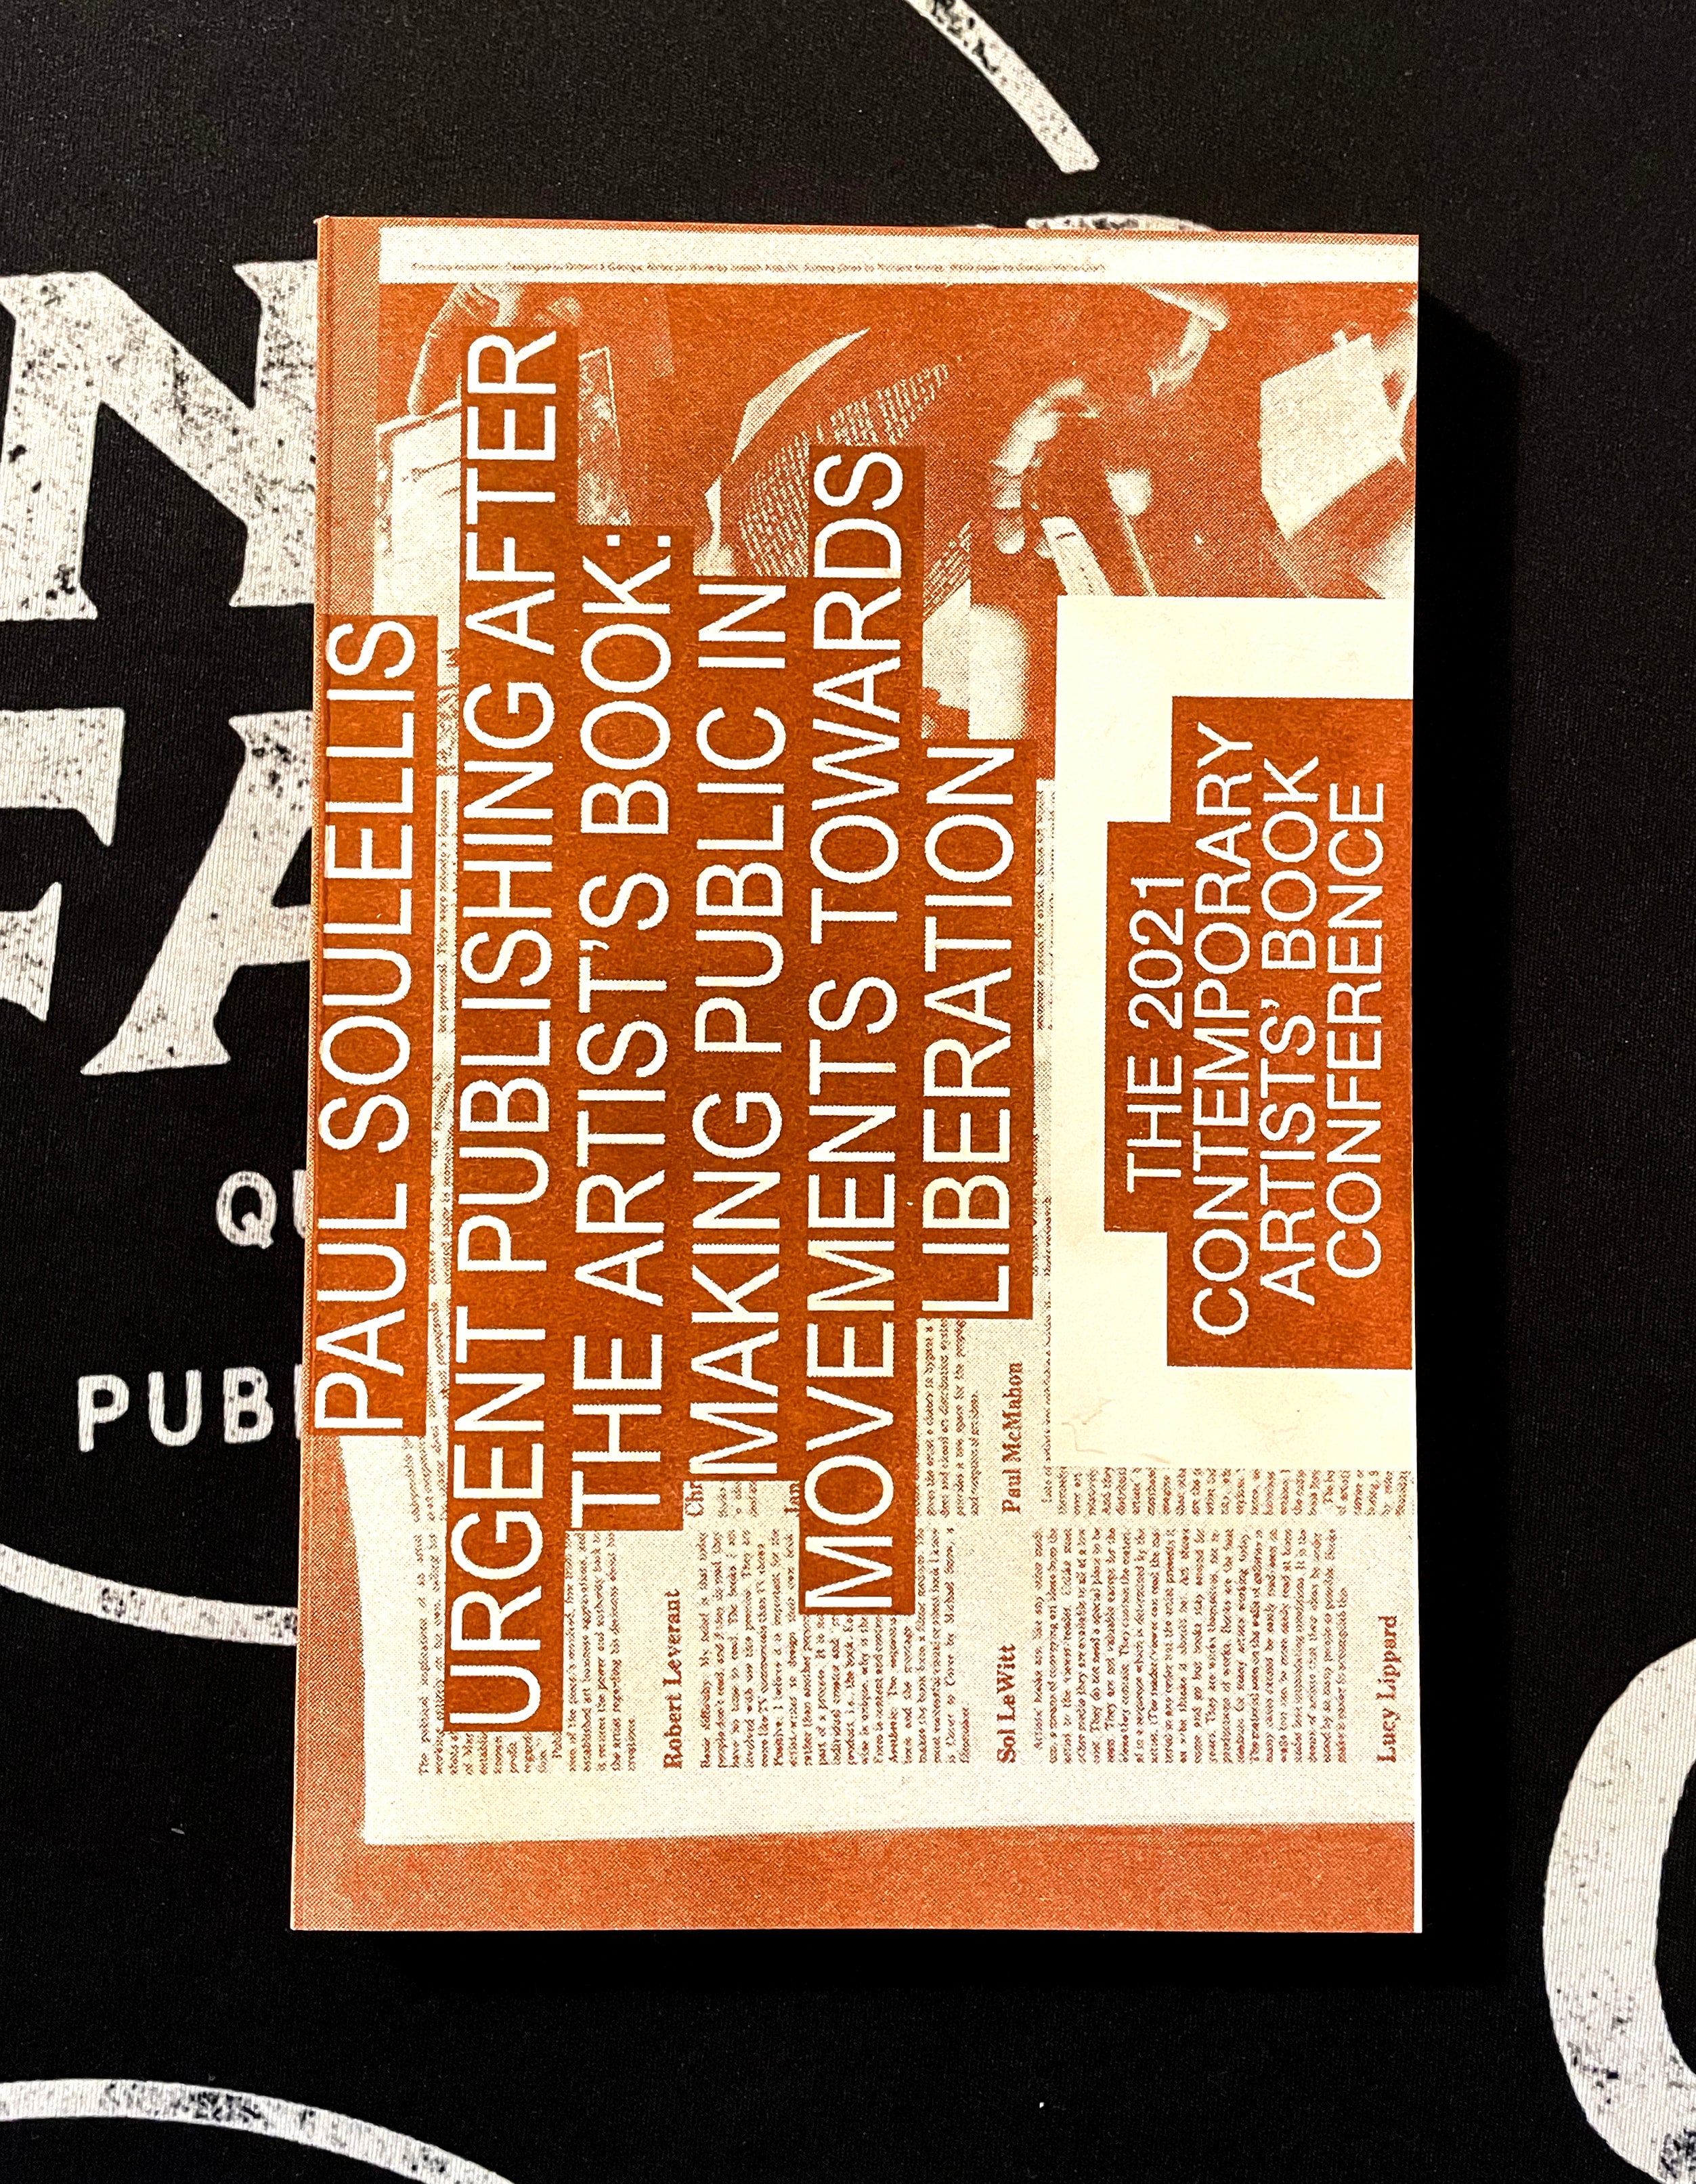 Urgent Publishing After the Artist's Book: Making Public in Movements  Towards Liberation - Center for Book Arts